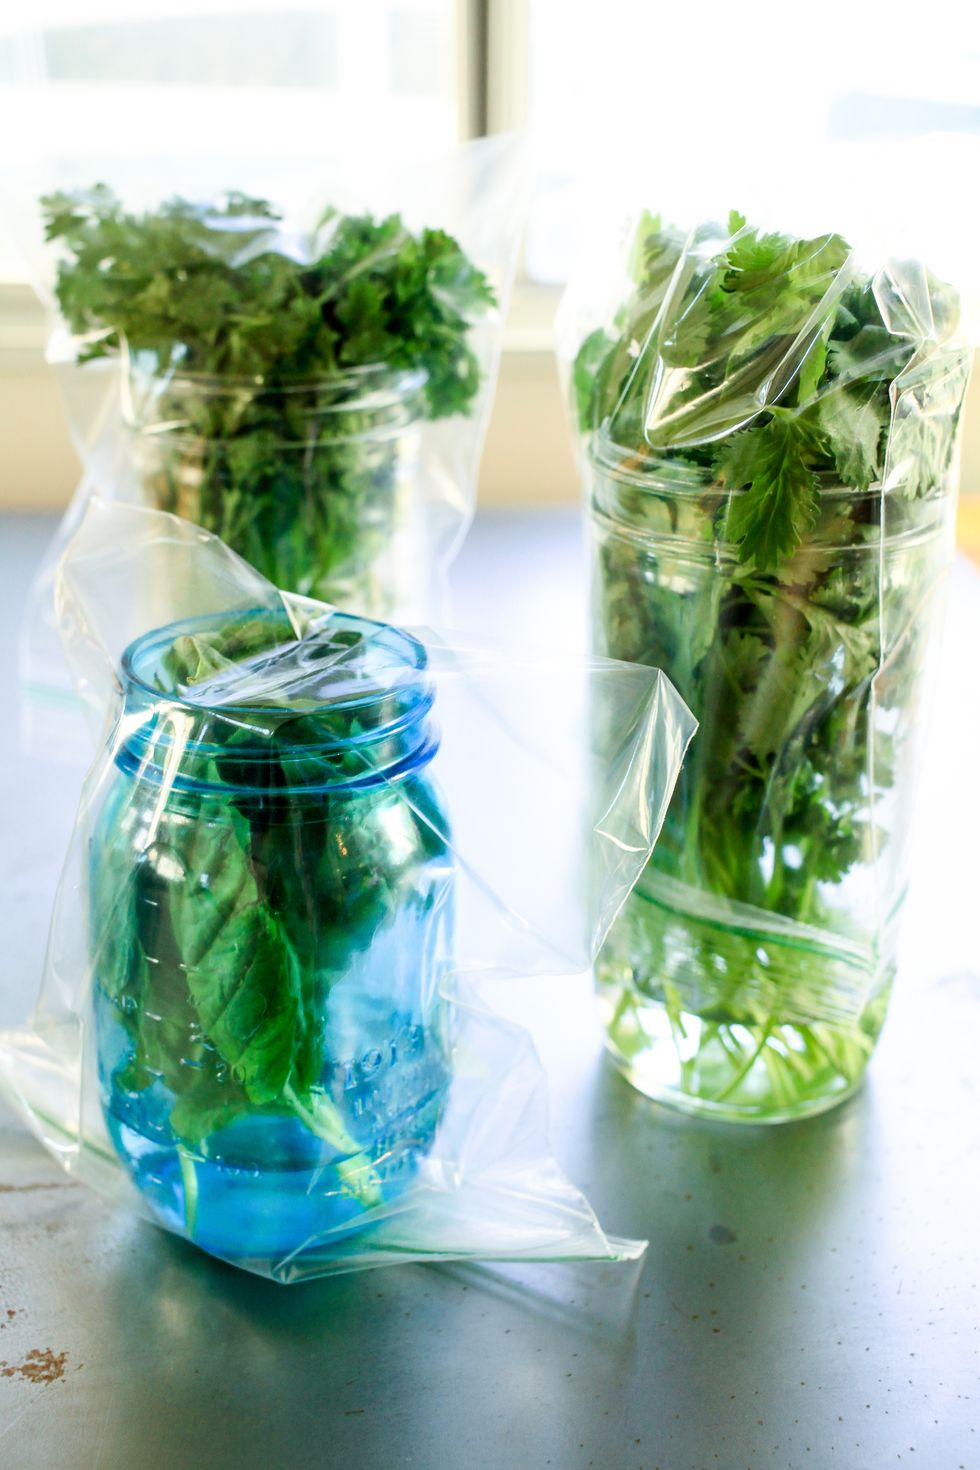 https://hips.hearstapps.com/thepioneerwoman/wp-content/uploads/2015/10/how-to-store-fresh-herbs-02.jpg?resize=980:*